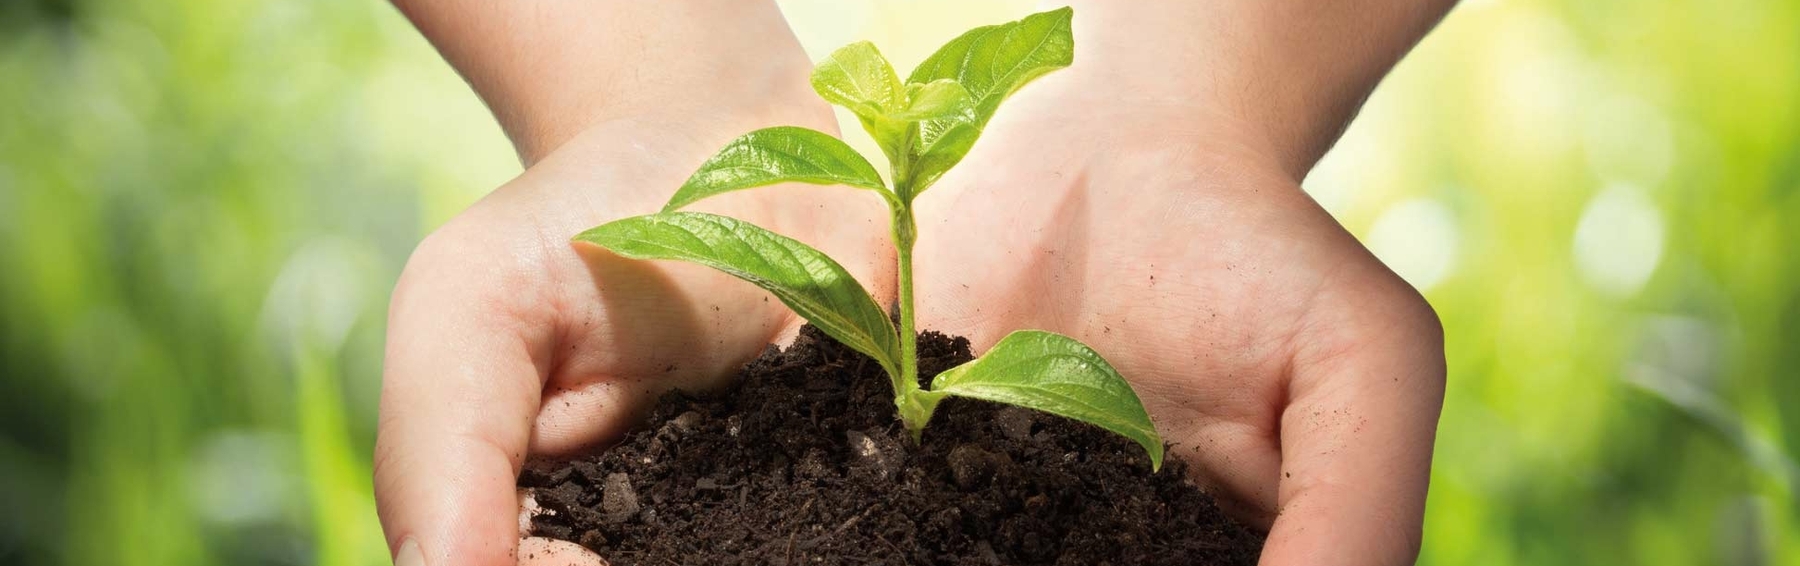 Plant seedling in the hand